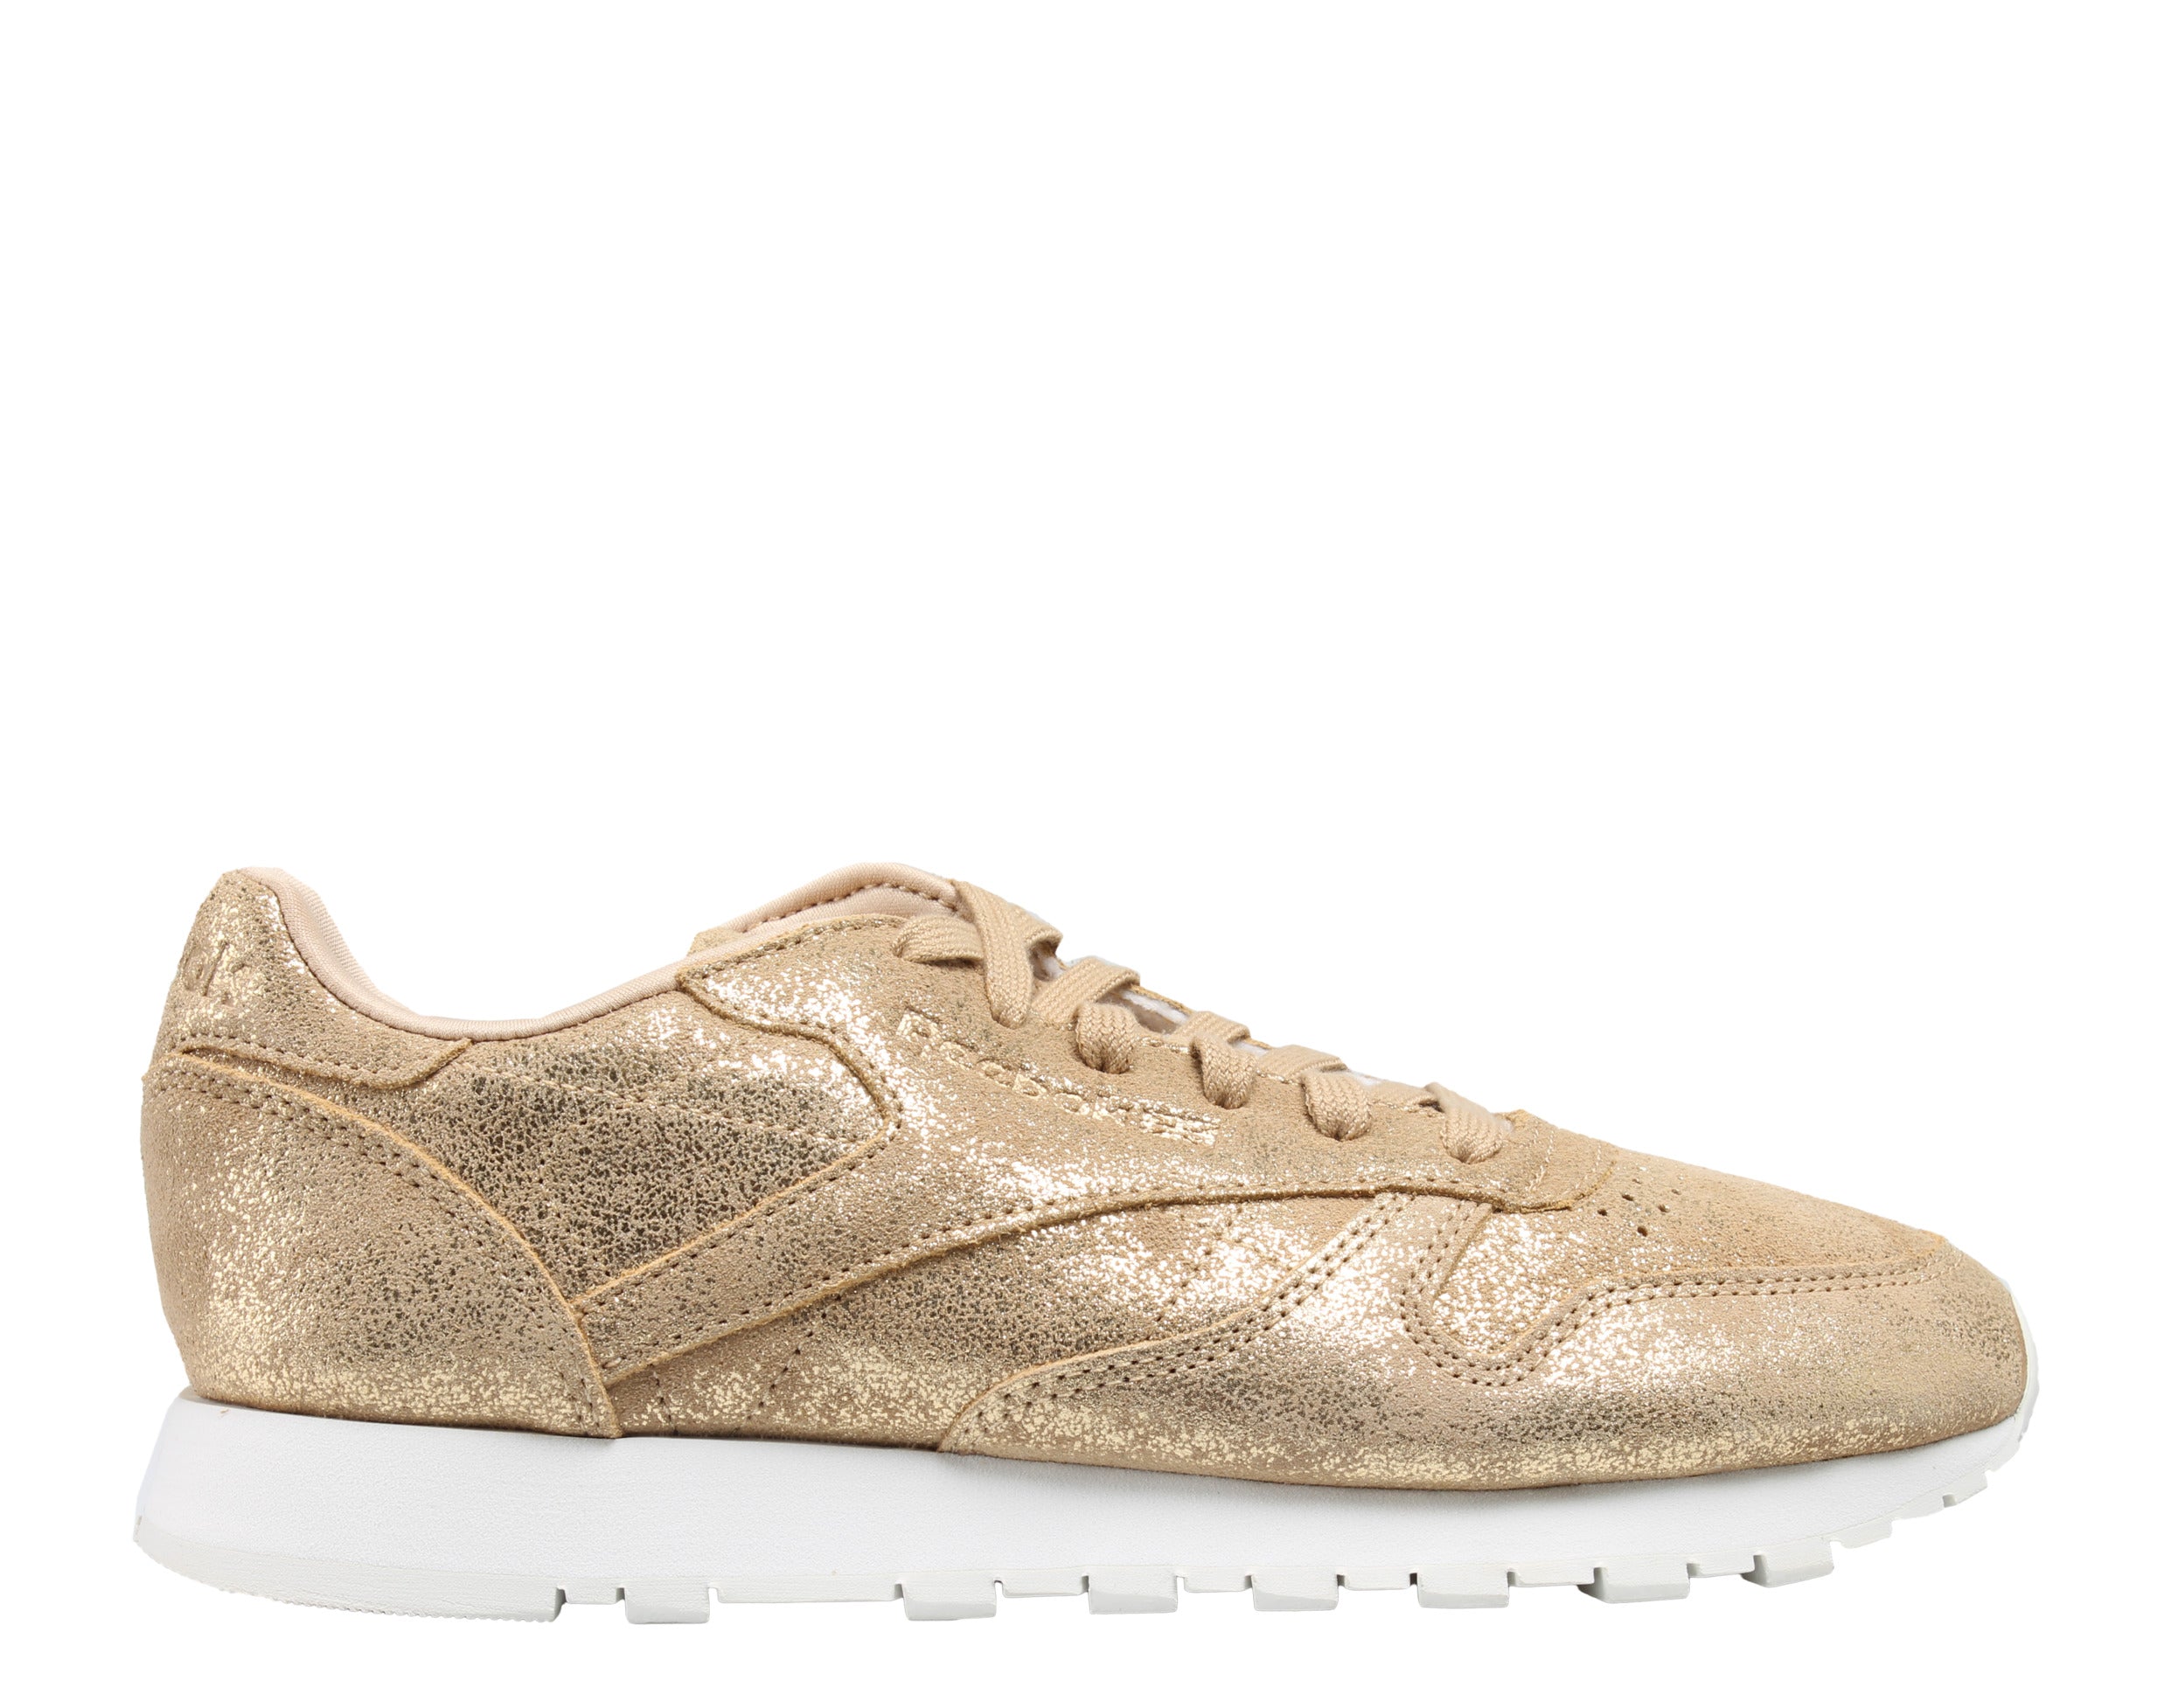 cueva trolebús Amante Reebok Classic Leather Shimmer Women's Running Shoes – NYCMode